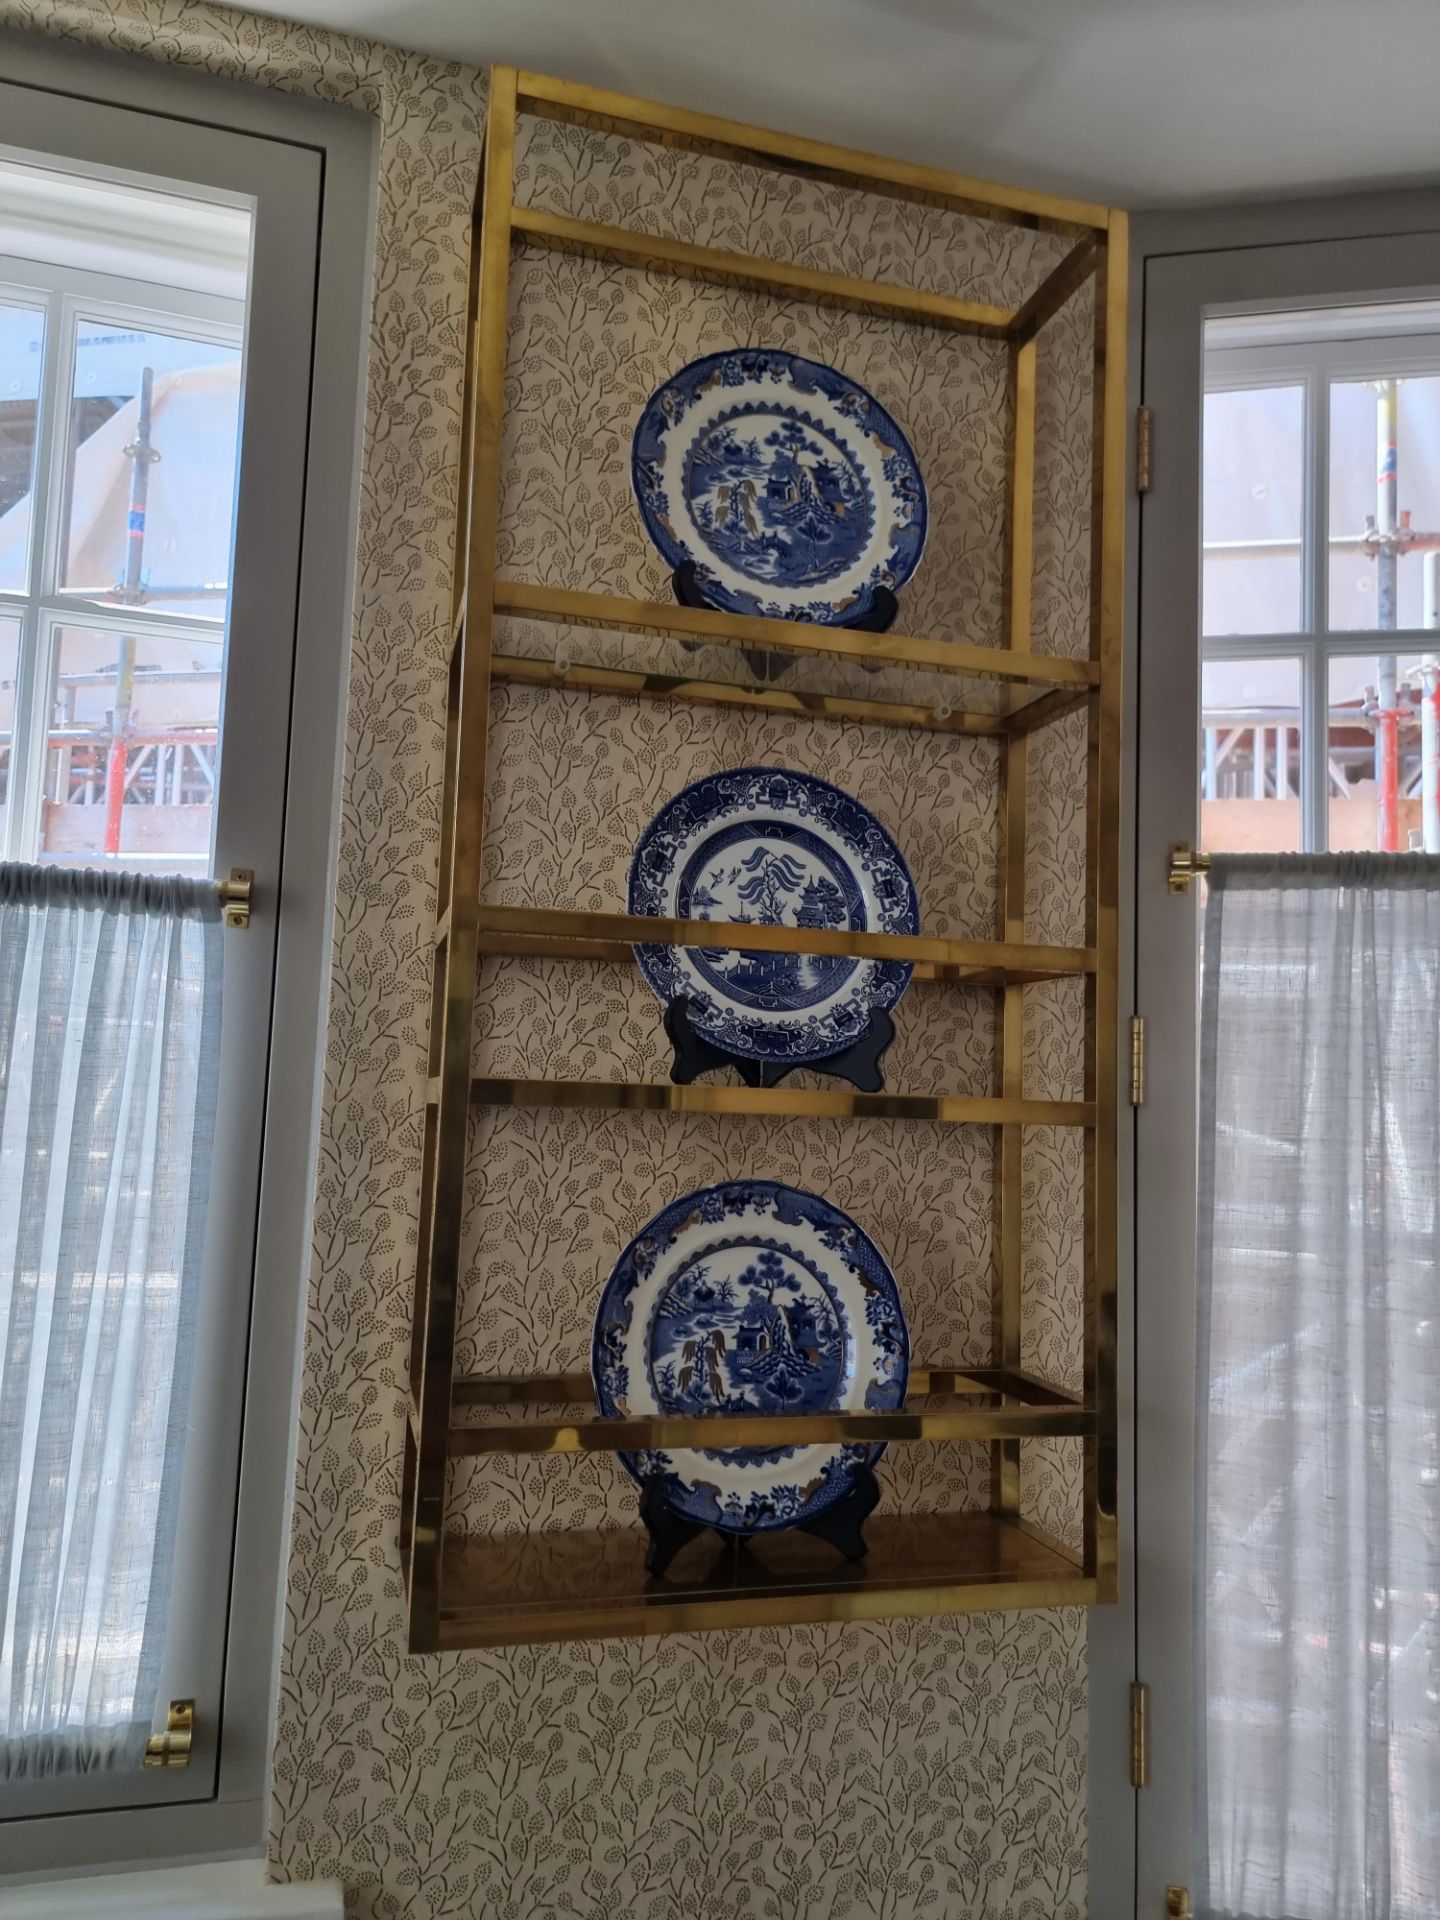 Masons Ironstone 'Willow' Blue and White Dinner Plates (Apt 1)